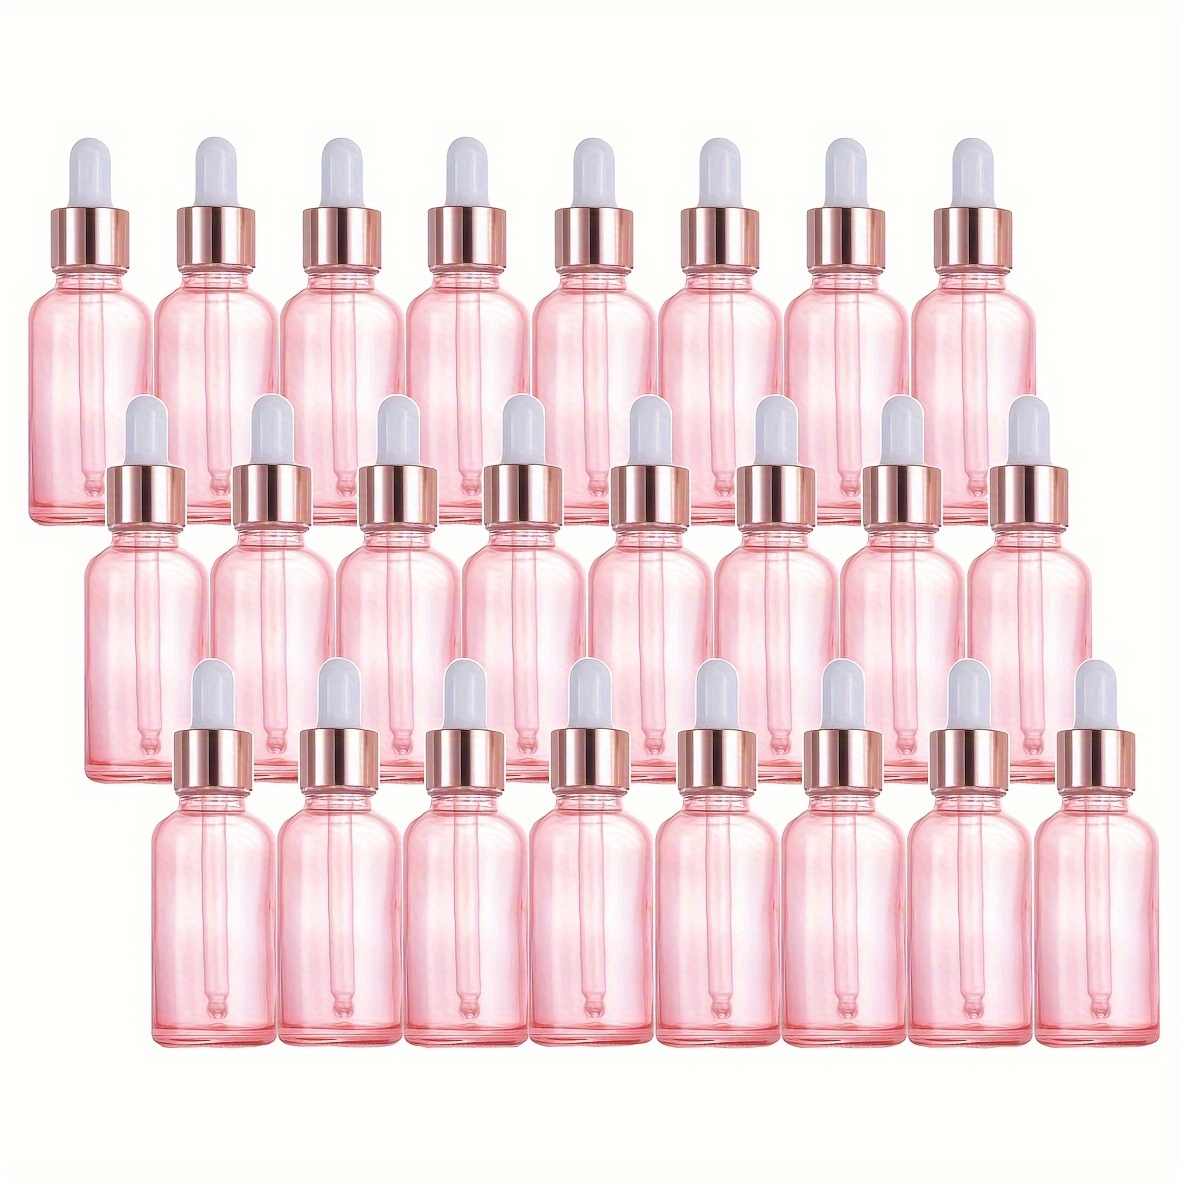 

24-piece Pink Glass Dropper Bottles With Eye Droppers, Caps, Labels & Funnel - Perfect For Essential Oils, Lab Chemicals & Perfumes